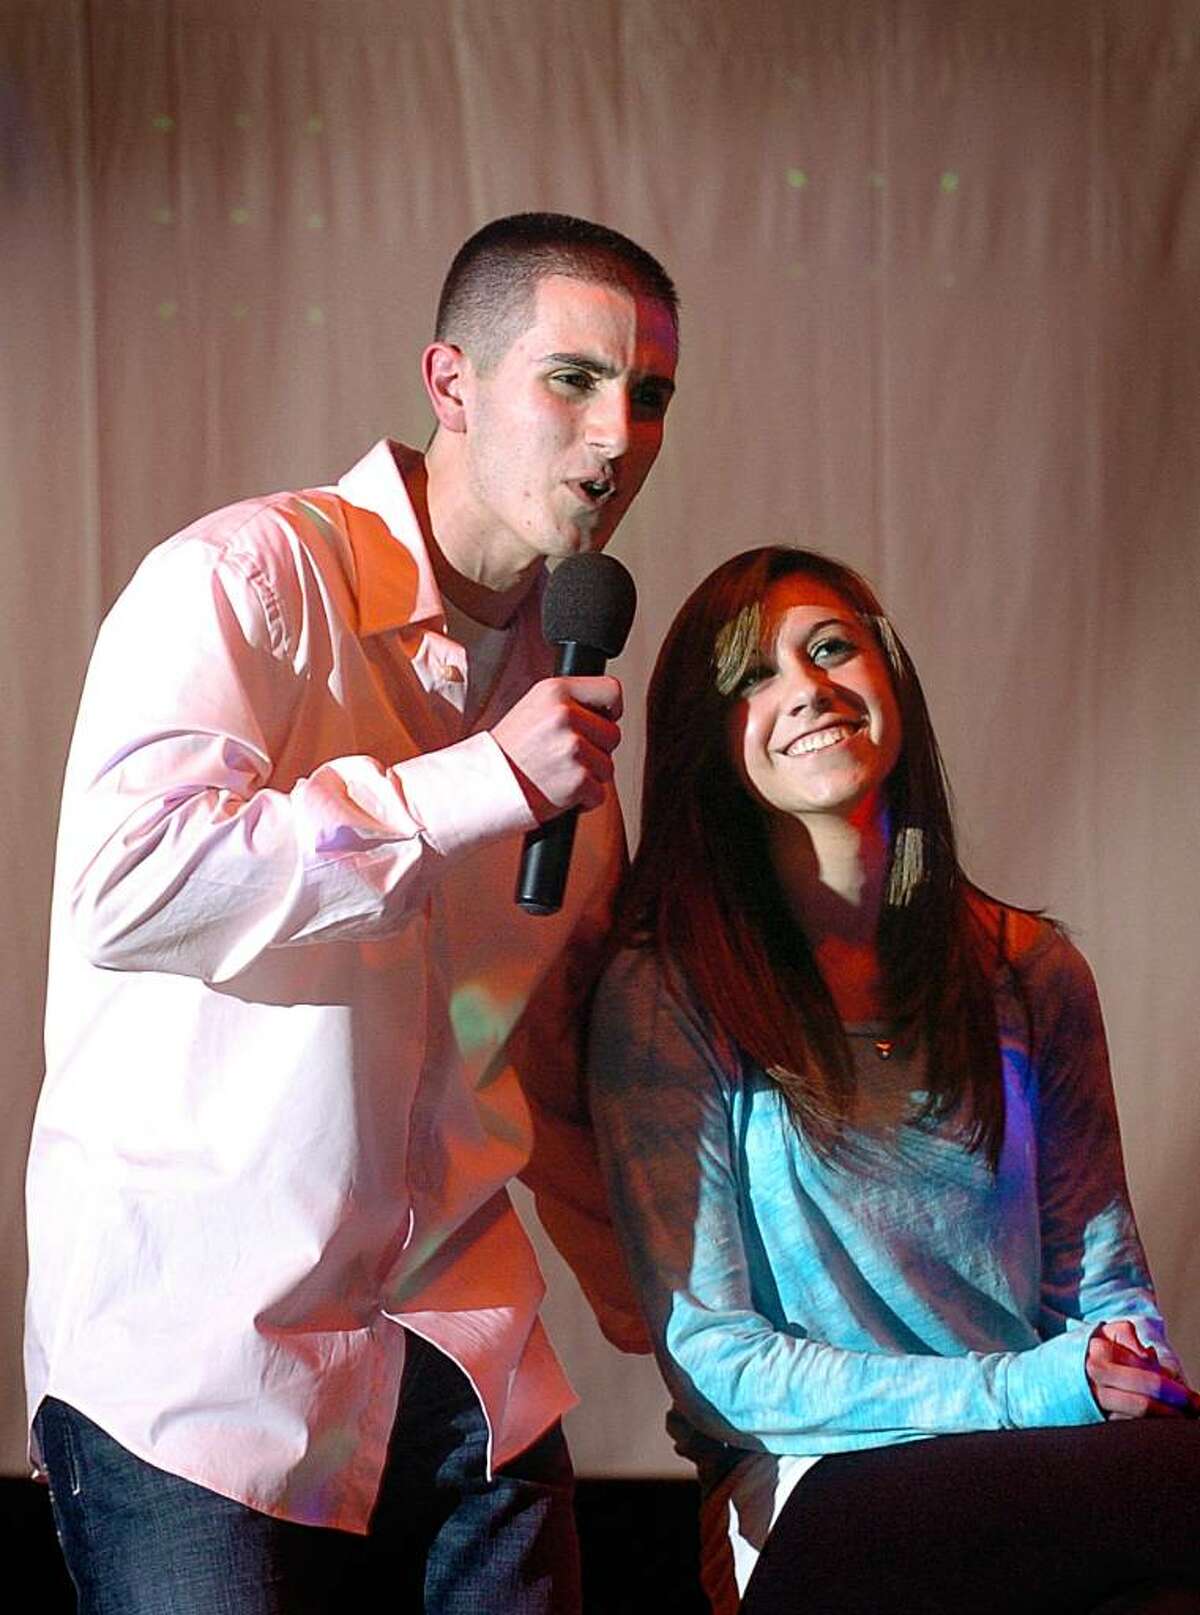 Steve Loschiavo serenades girlfriend Mallory Morlando on stage during the talent portion of St. Joseph's fourth annual Mr. Student Body Competition Thursday Mar. 18, 2010 at the school in Trumbull. Proceeds benefit the Center for Women and Families of Bridgeport and their White Ribbon Campaign, in which men and boys oppose violence against women.